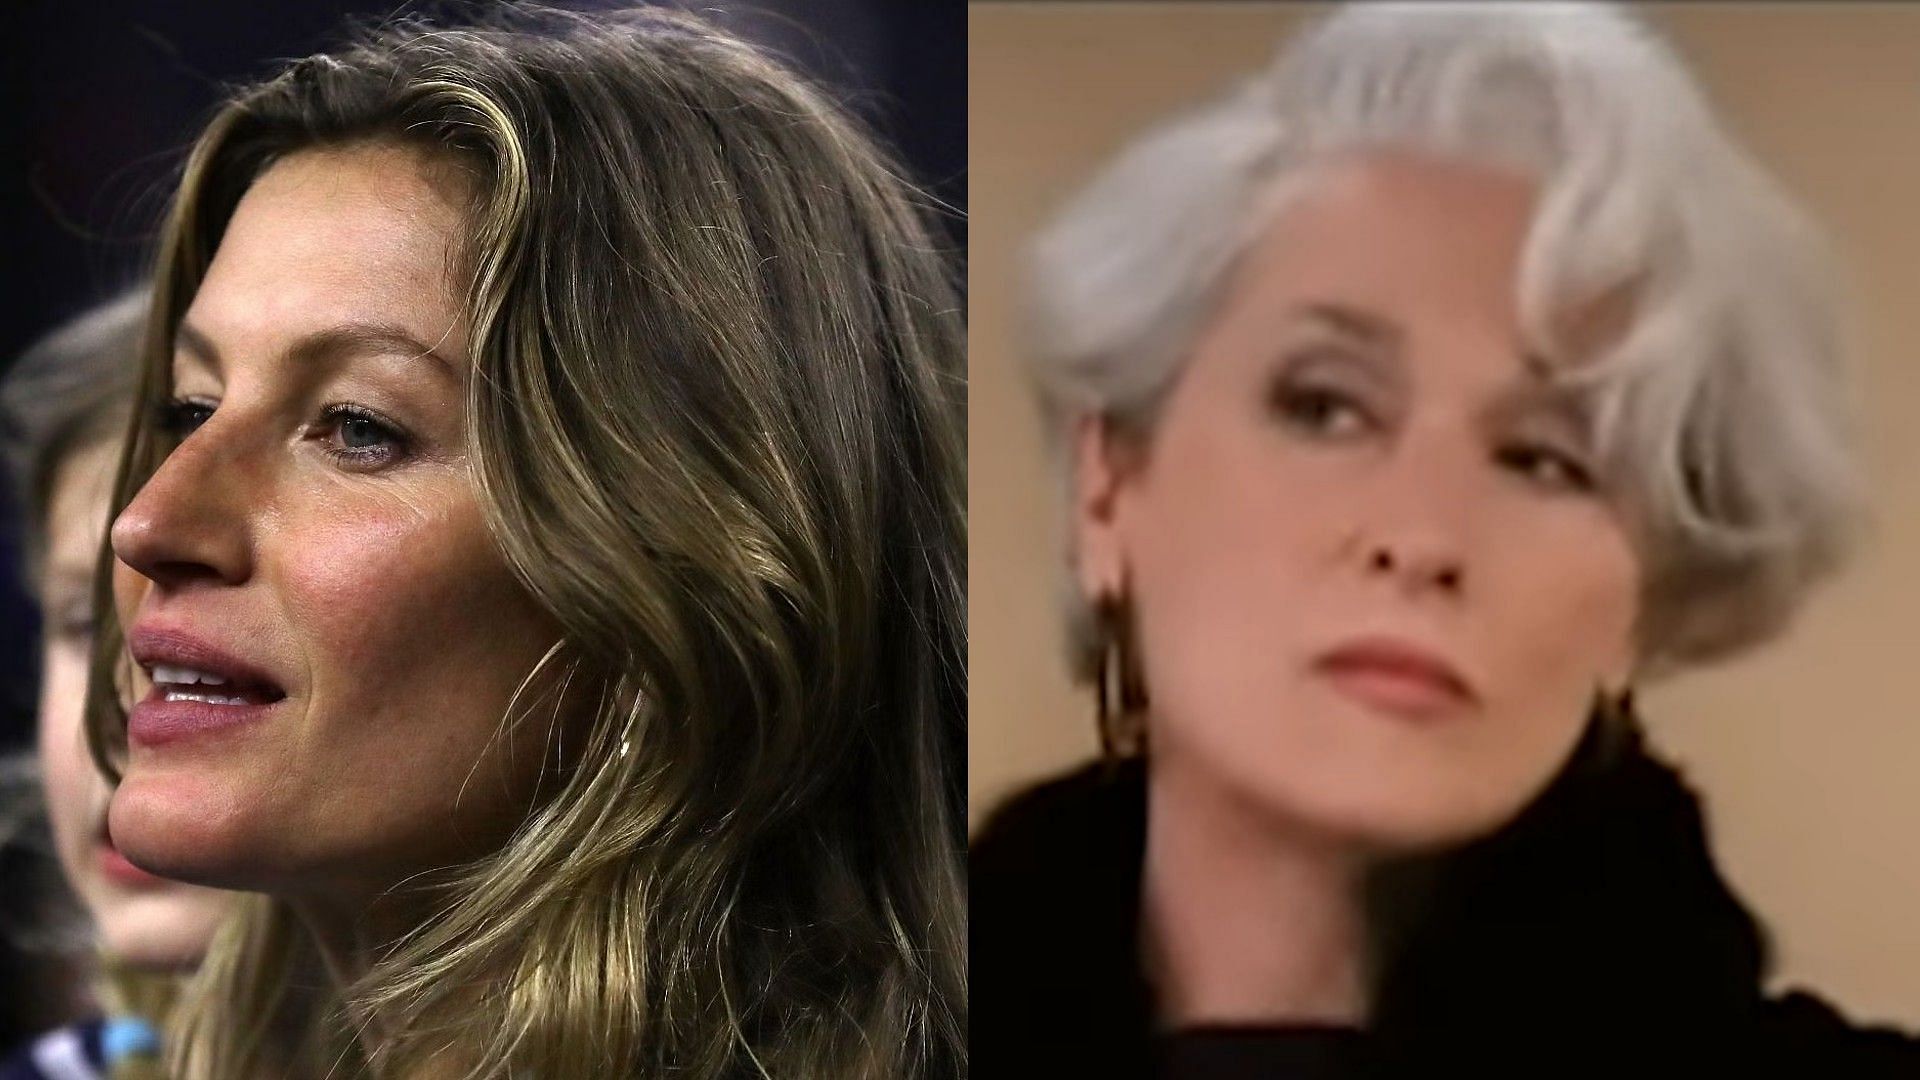 Gisele Bundchen reveals apprehension about working with Meryl Streep in The Devil Wears Prada - Courtesy of Rotten Tomatoes Classic Trailers on YouTube